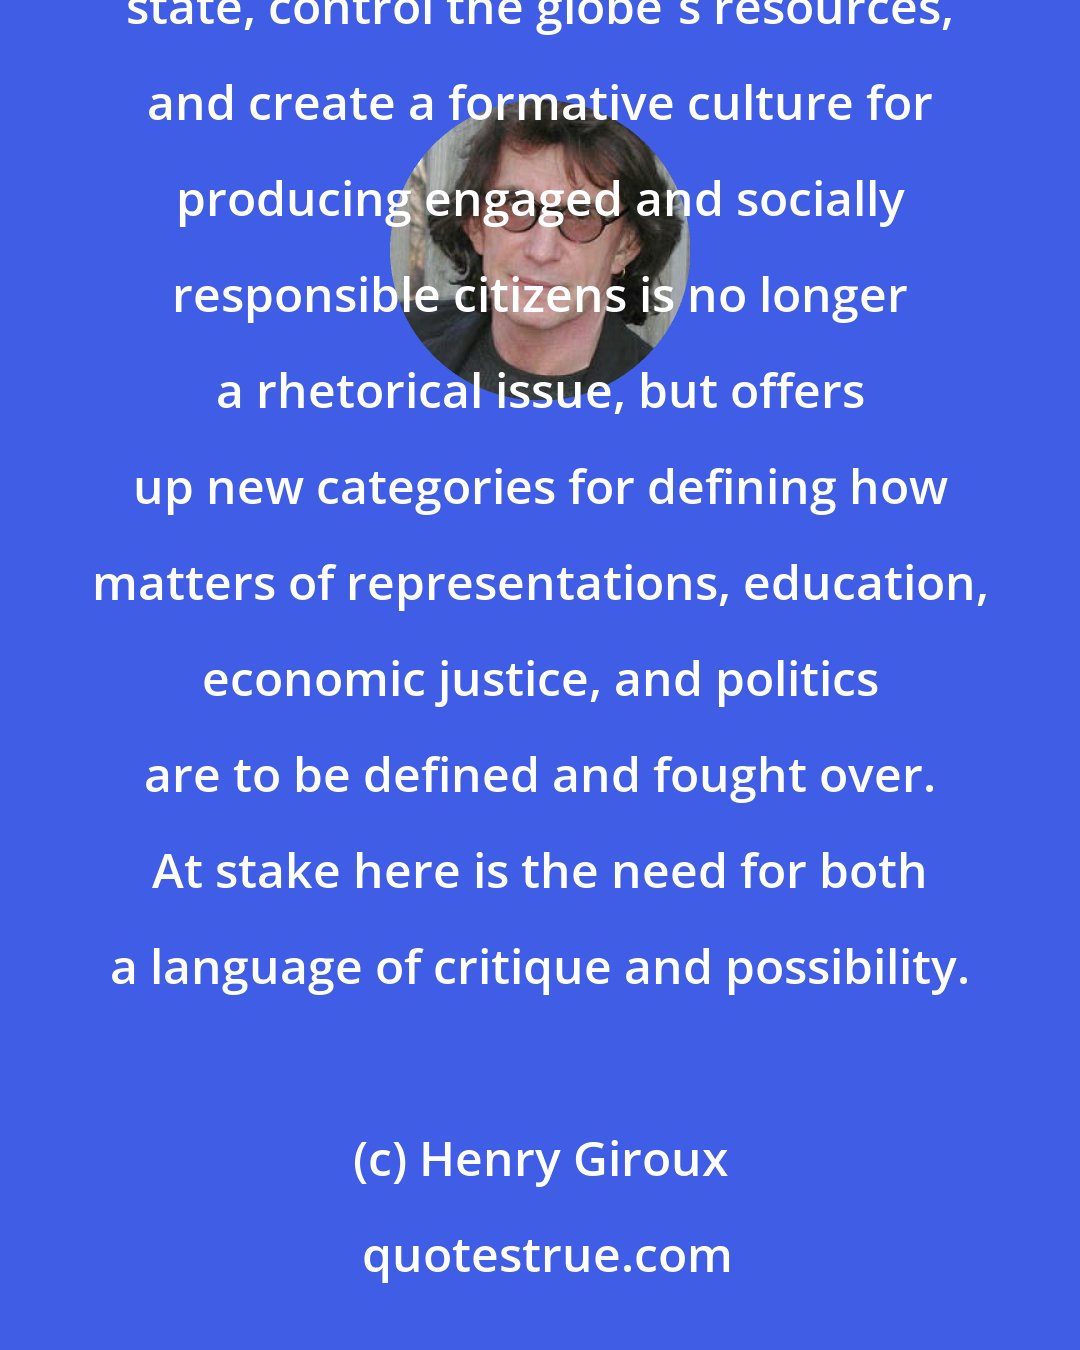 Henry Giroux: The issue of who gets to define the future, own the nation's wealth, shape the parameters of the social state, control the globe's resources, and create a formative culture for producing engaged and socially responsible citizens is no longer a rhetorical issue, but offers up new categories for defining how matters of representations, education, economic justice, and politics are to be defined and fought over. At stake here is the need for both a language of critique and possibility.